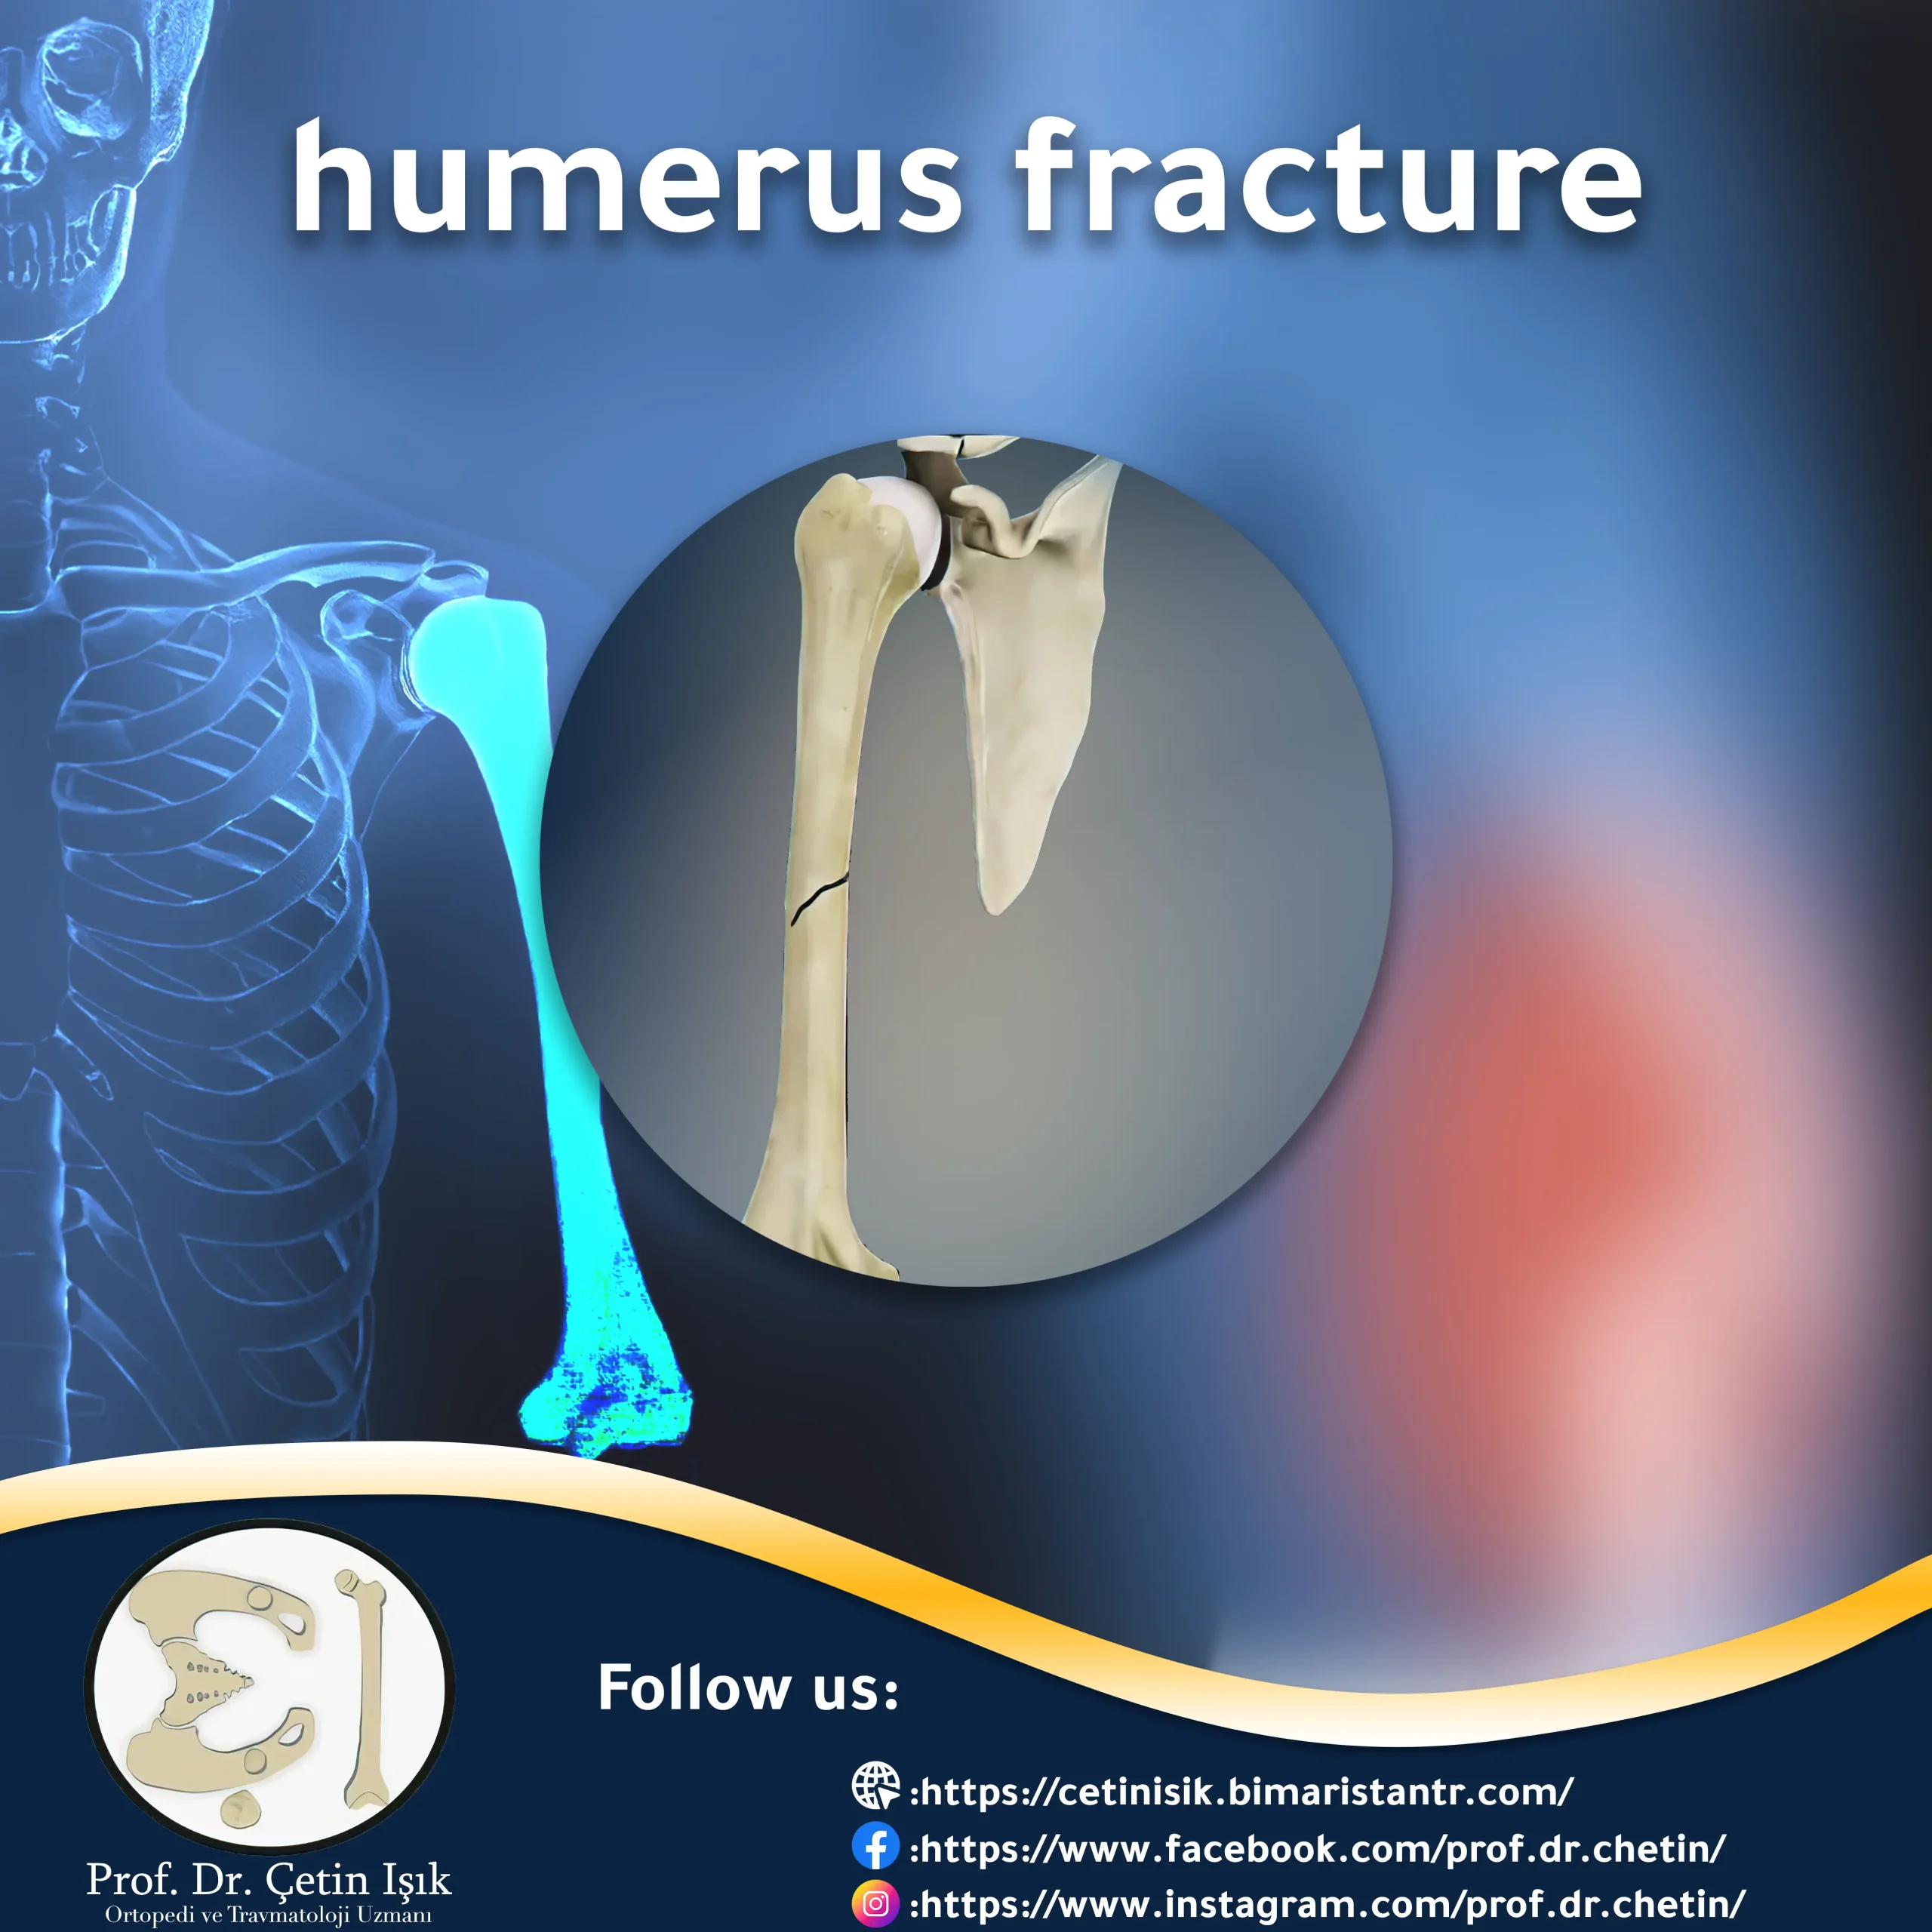 Cover image of the humerus fracture article